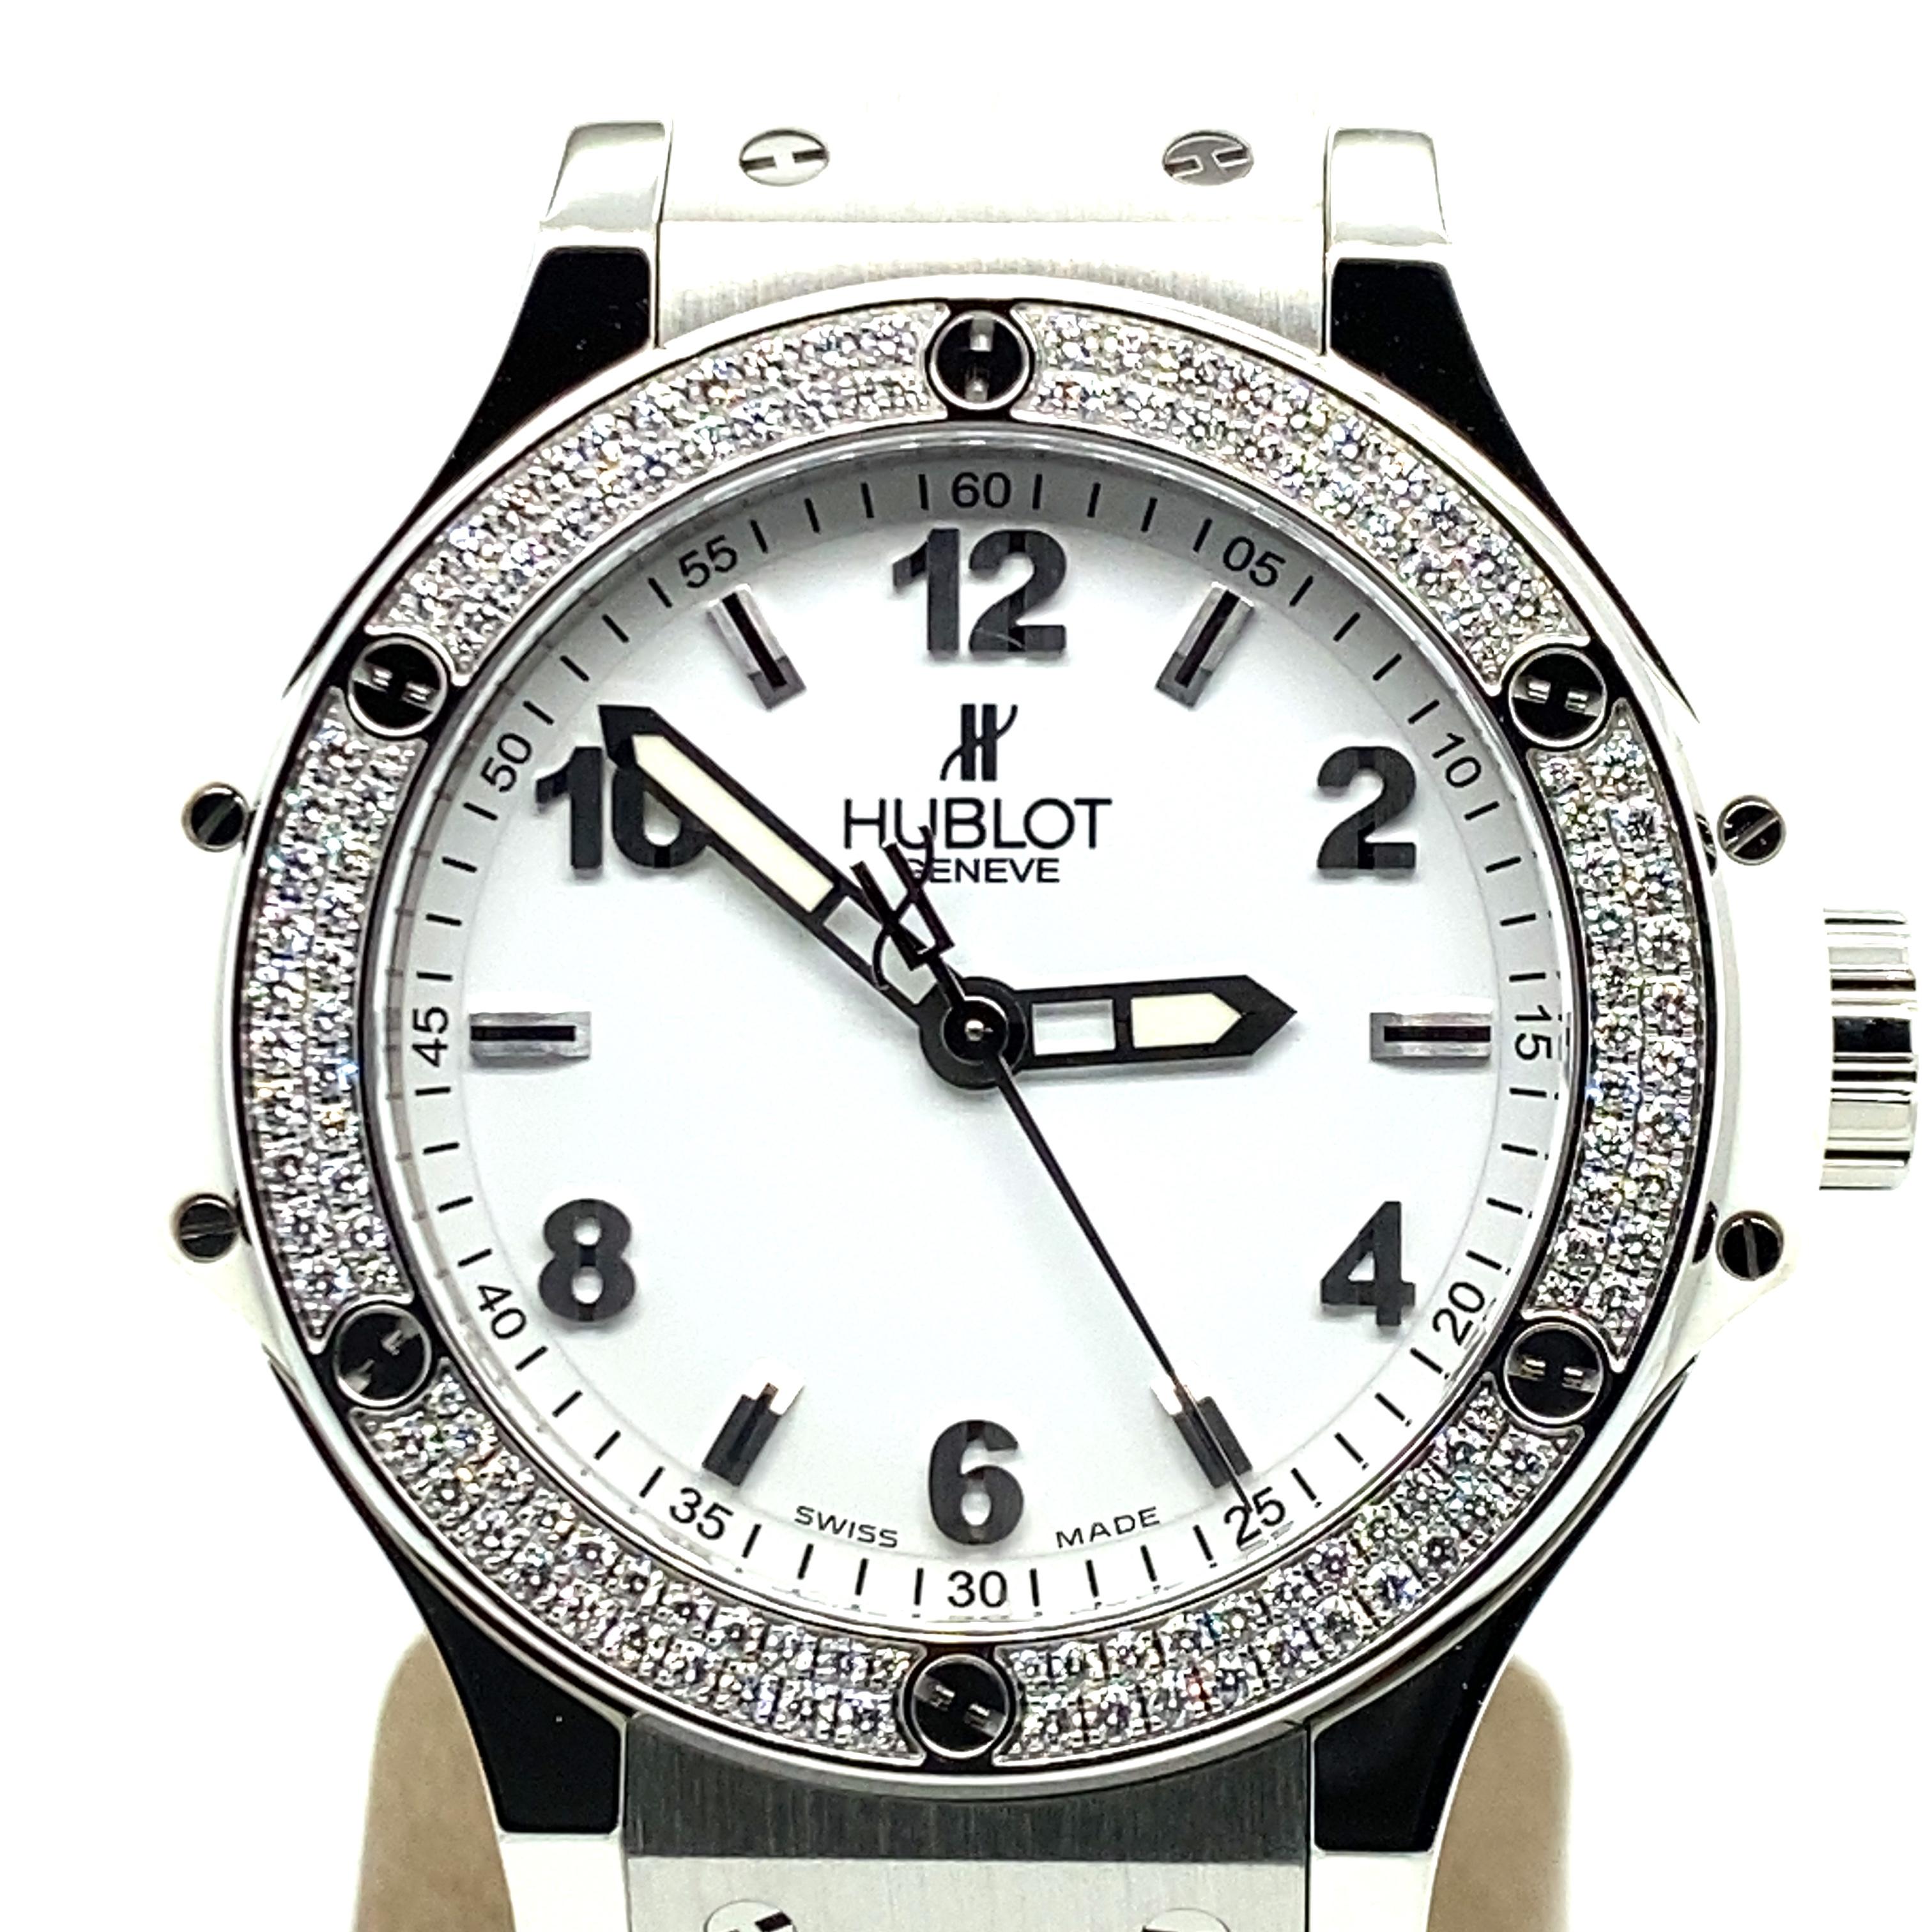 Elegant Hublot Big Bang ladies watch with polished and satin-finished stainless steel case. Bezel set with 126 brilliant-cut diamonds totaling 0.87ct - finished with 6 H-shaped titanium screws. Sapphire glas with anti-reflective treatment.

Comes